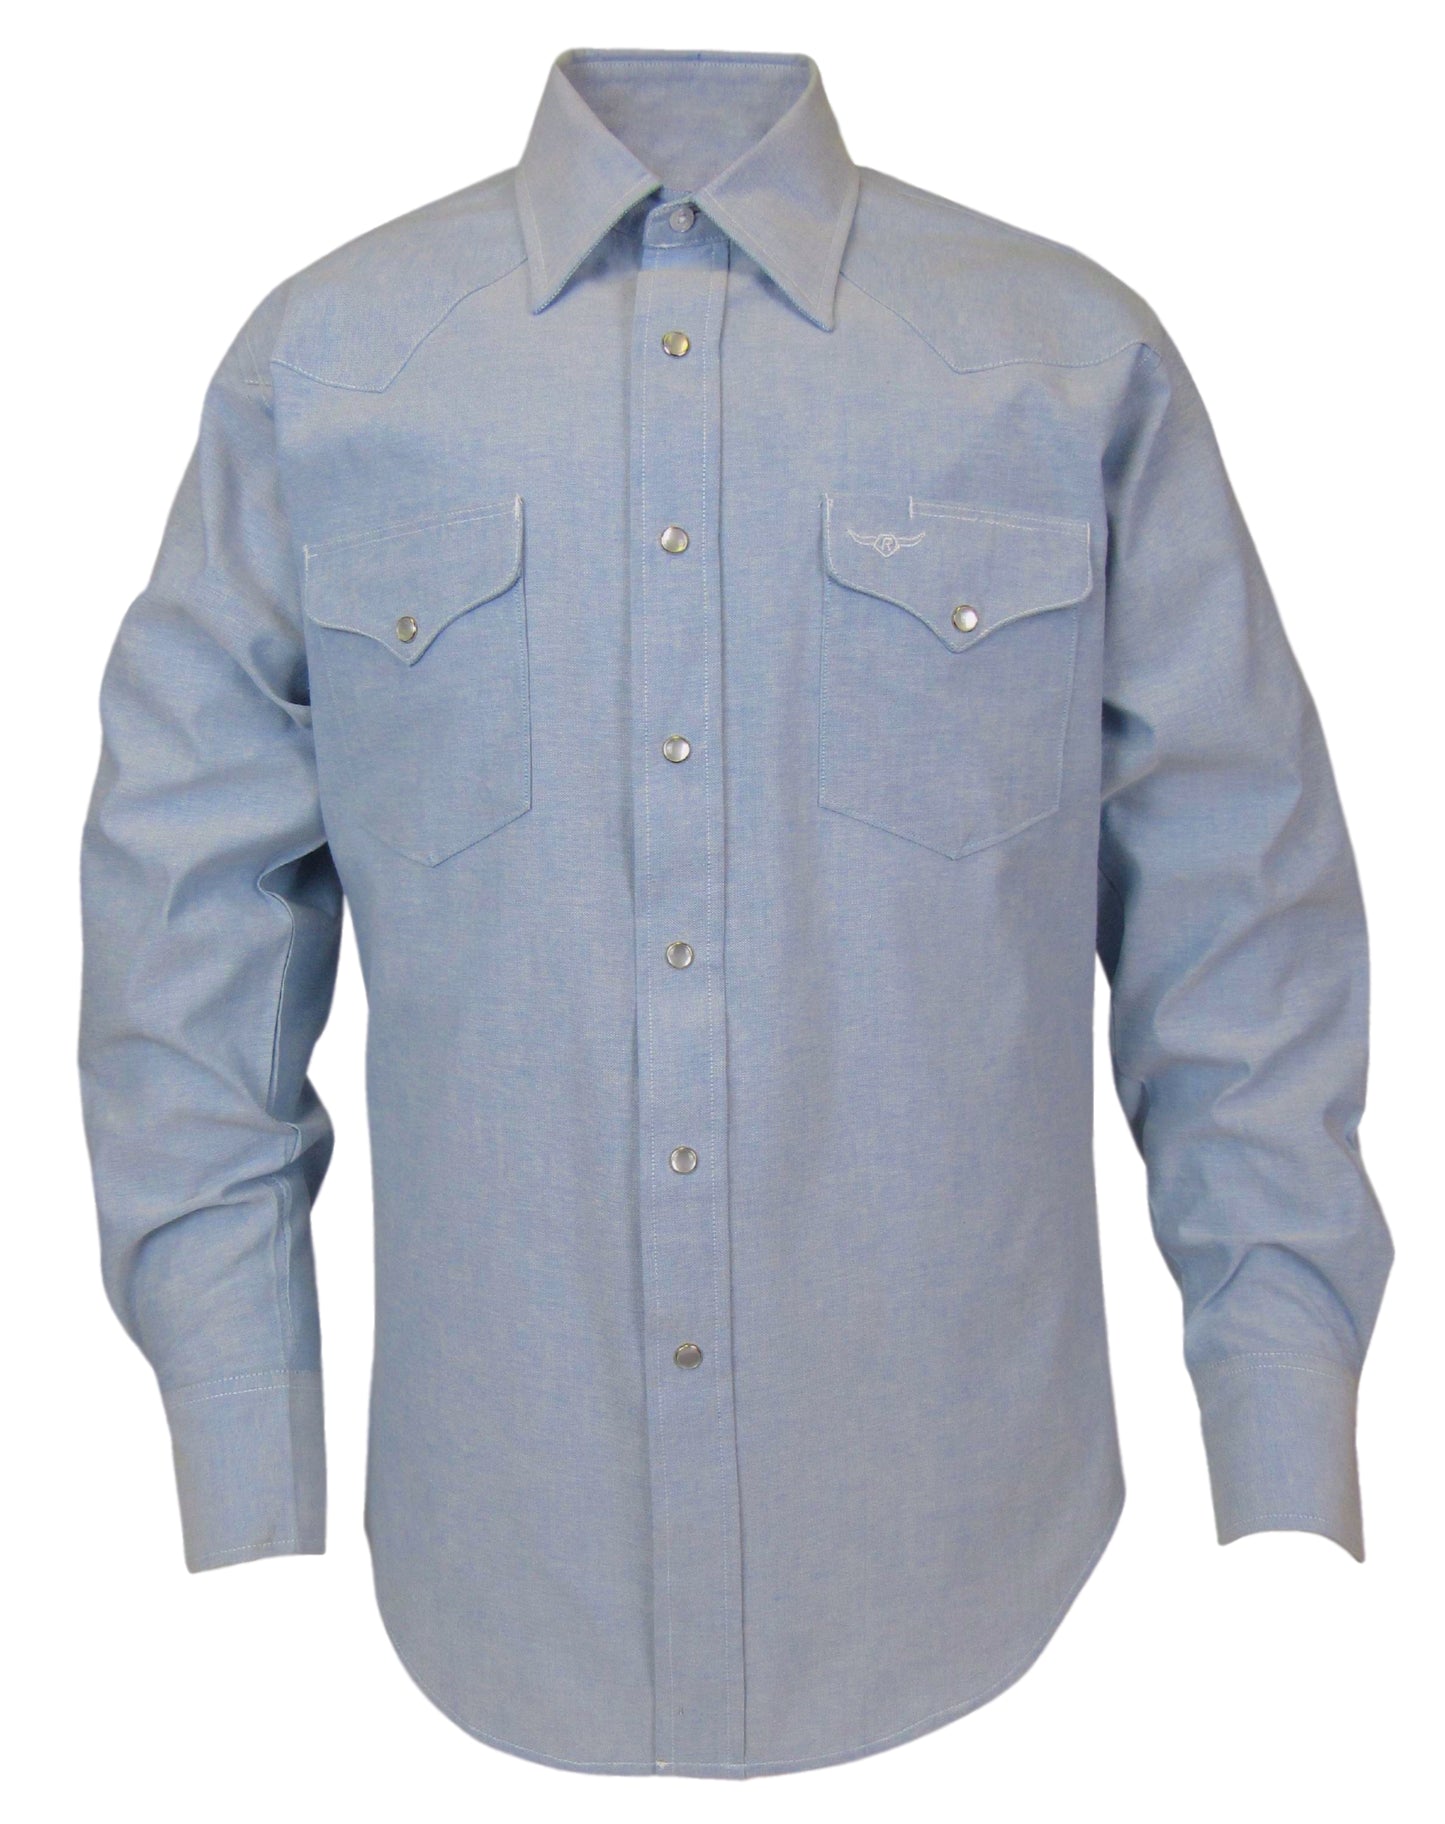 Flying R Ranchwear Made in USA Lt Blue Chambray with snaps